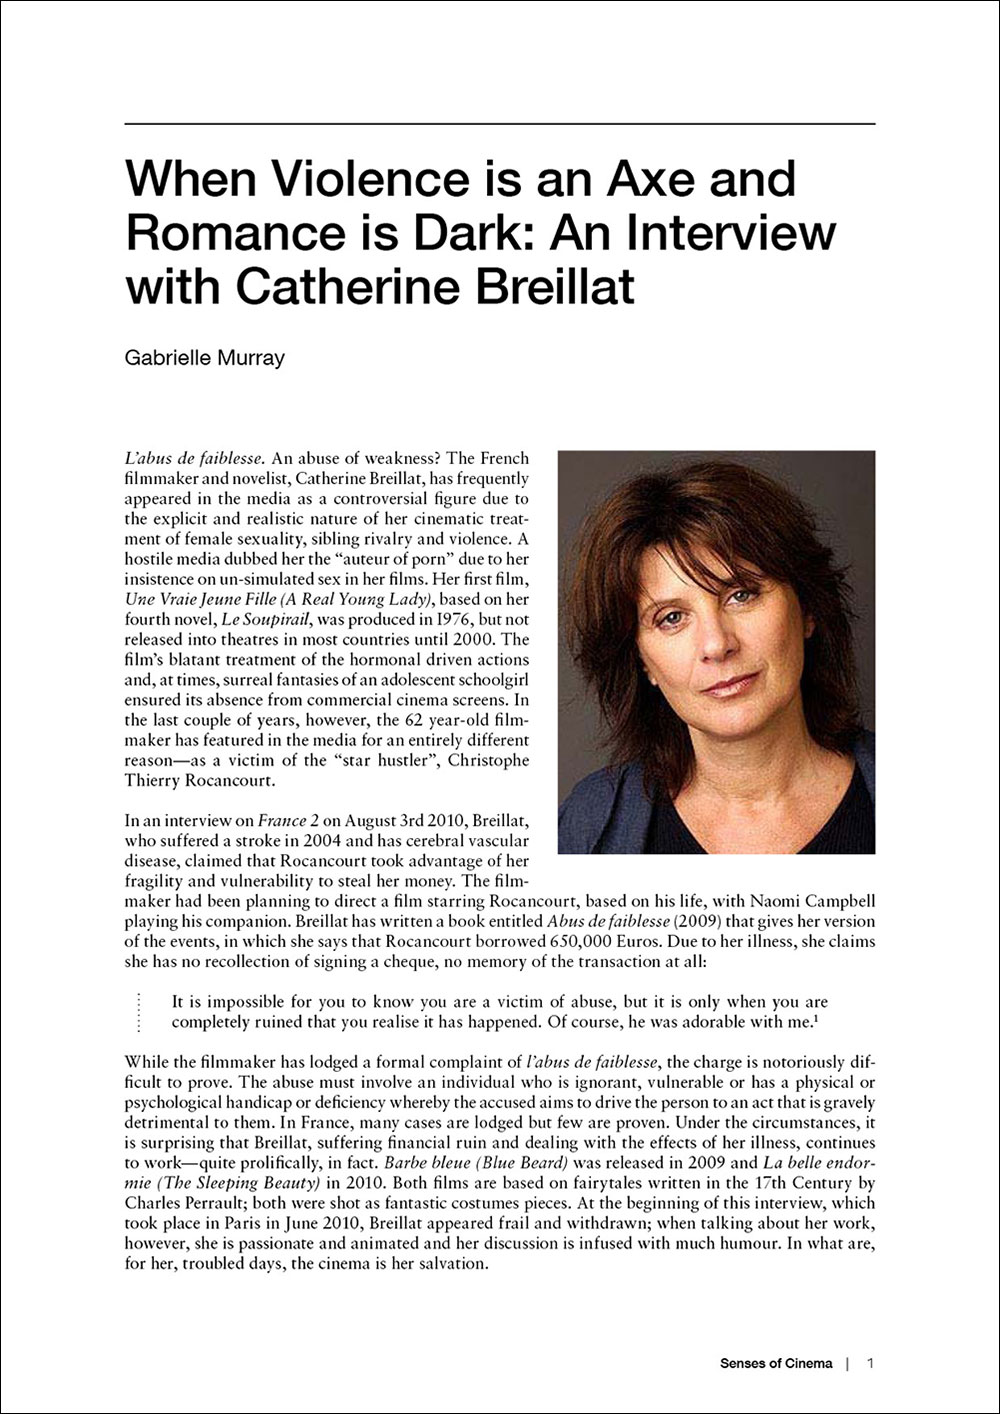 When Violence is an Axe and Romance is Dark: An Interview with Catherine  Breillat - The Education Shop